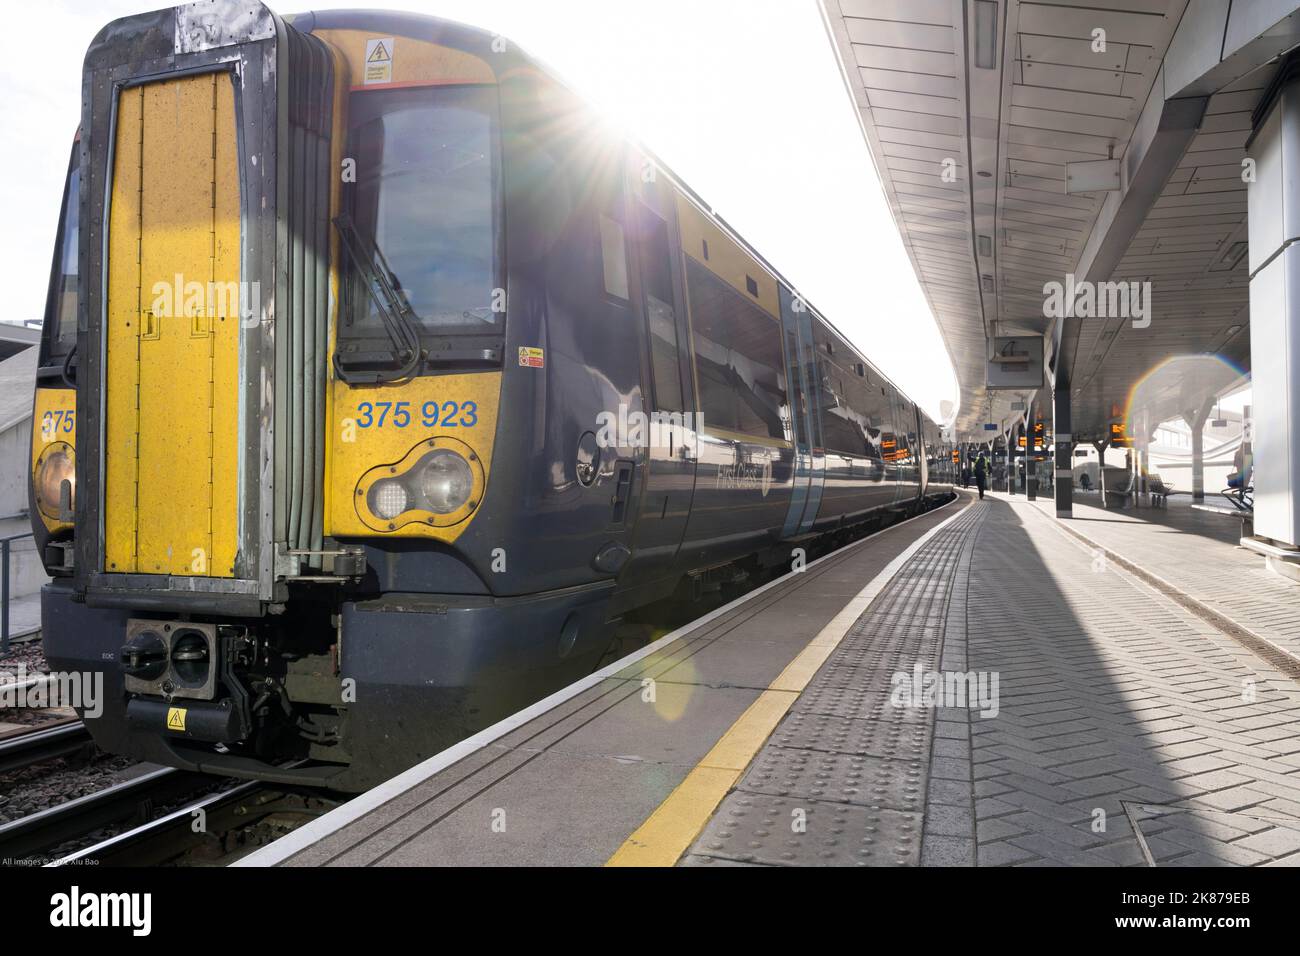 South-eastern train  ready to depart from in London Bridge station England UK Stock Photo